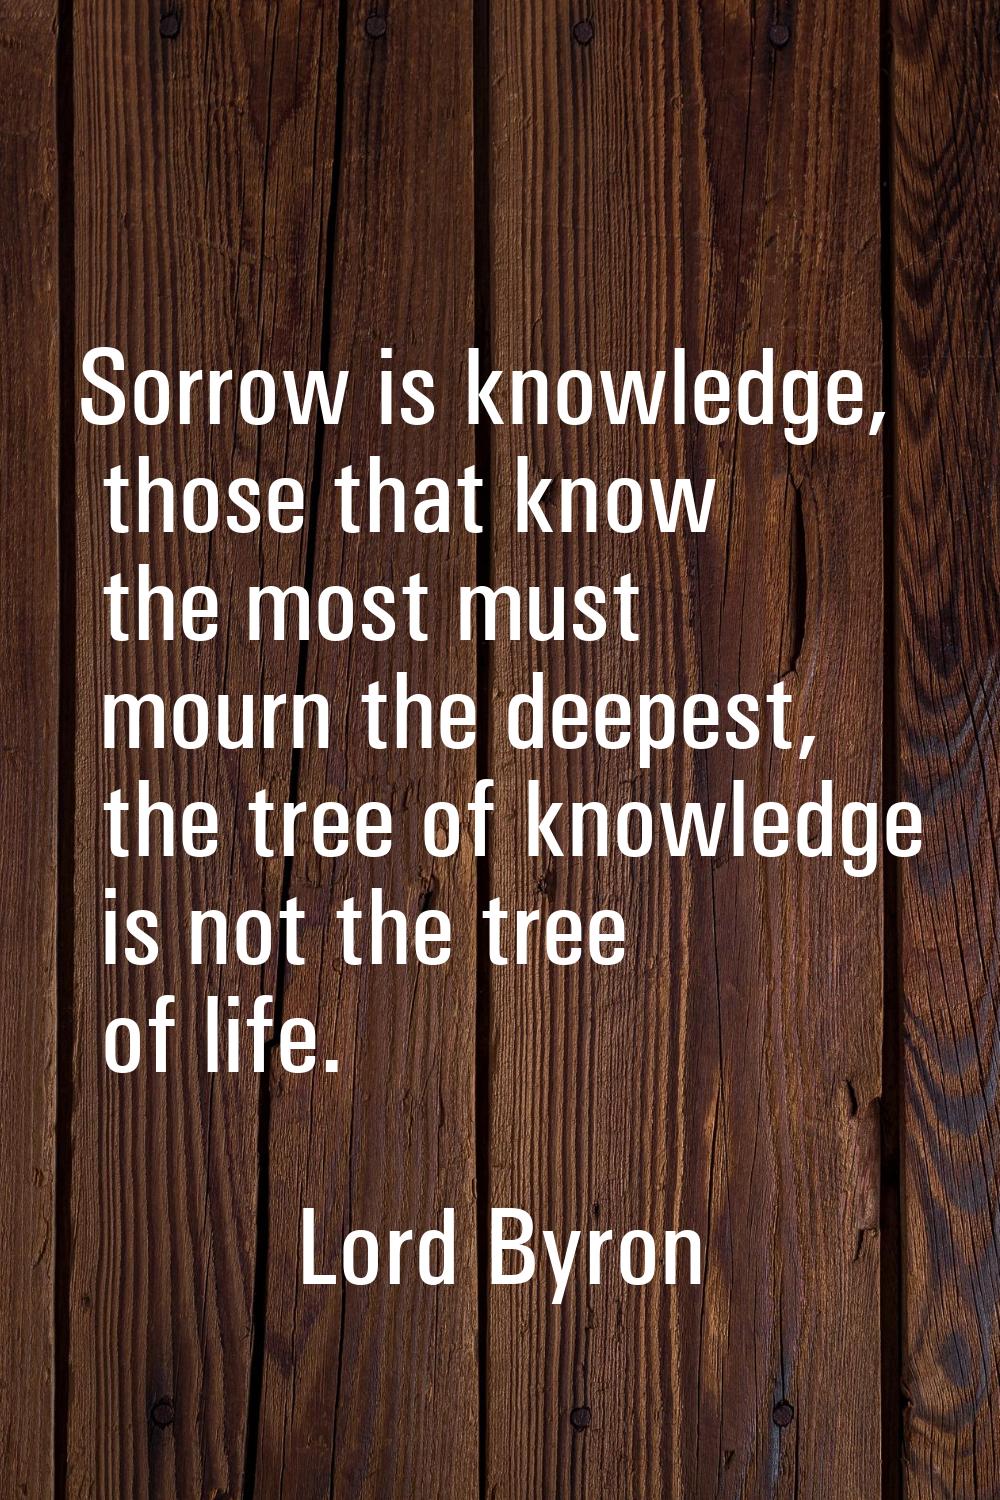 Sorrow is knowledge, those that know the most must mourn the deepest, the tree of knowledge is not 